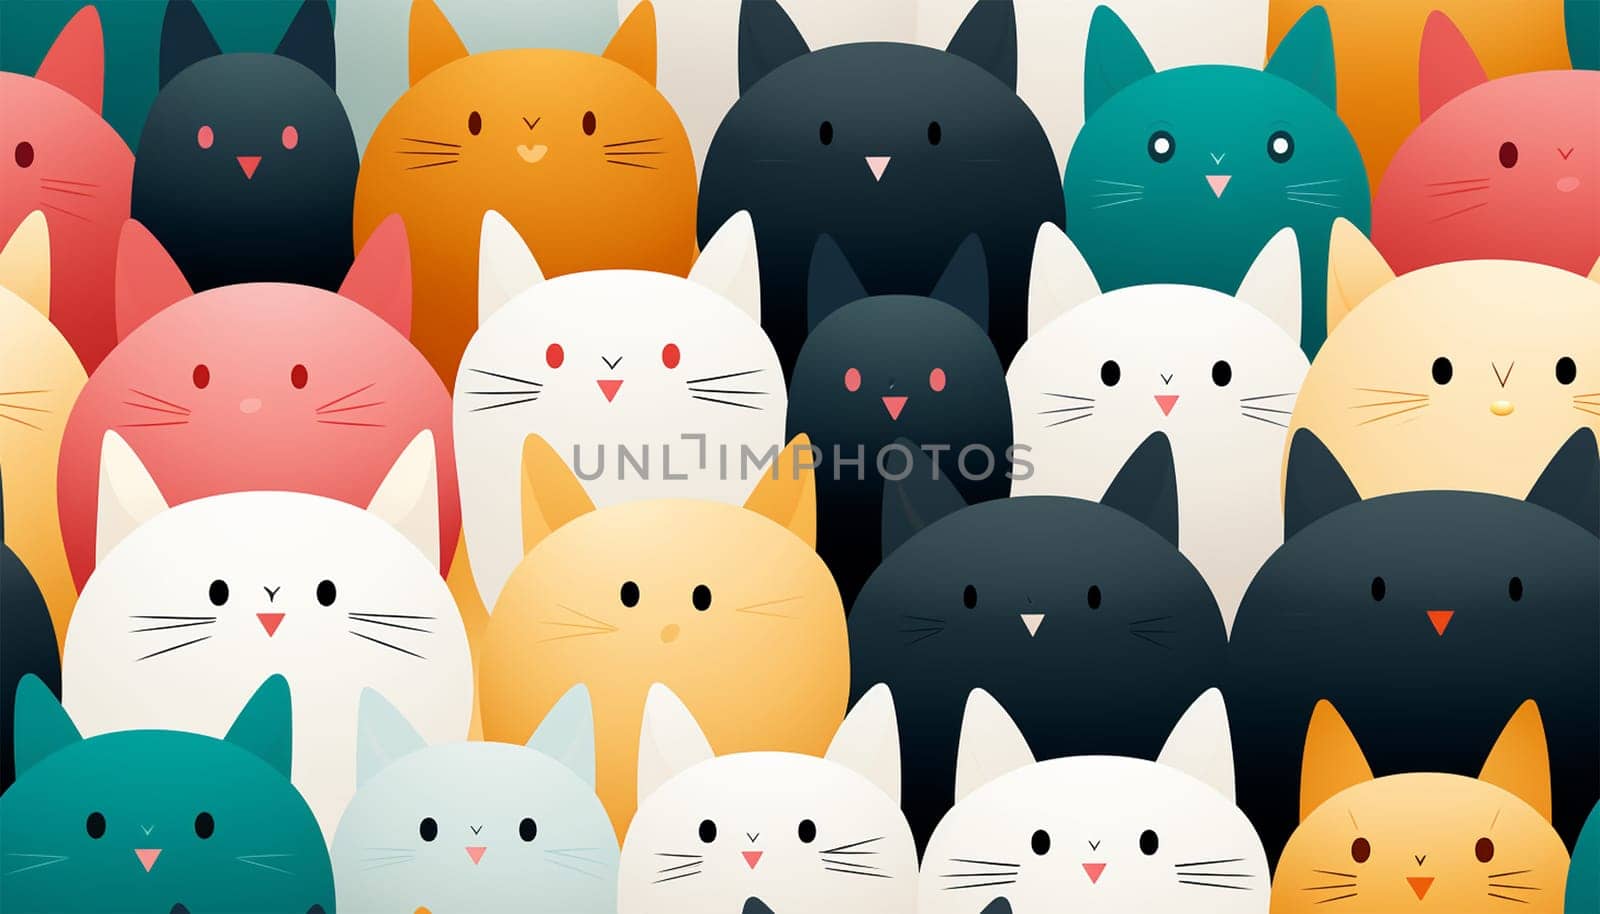 Cute cats Kawaii kittens funny .Seamless pattern of cute colorful cat cartoon.Happy meow.Animals character design.Image for card,poster,baby clothing.Kawaii.Colorful Illustration. In a row